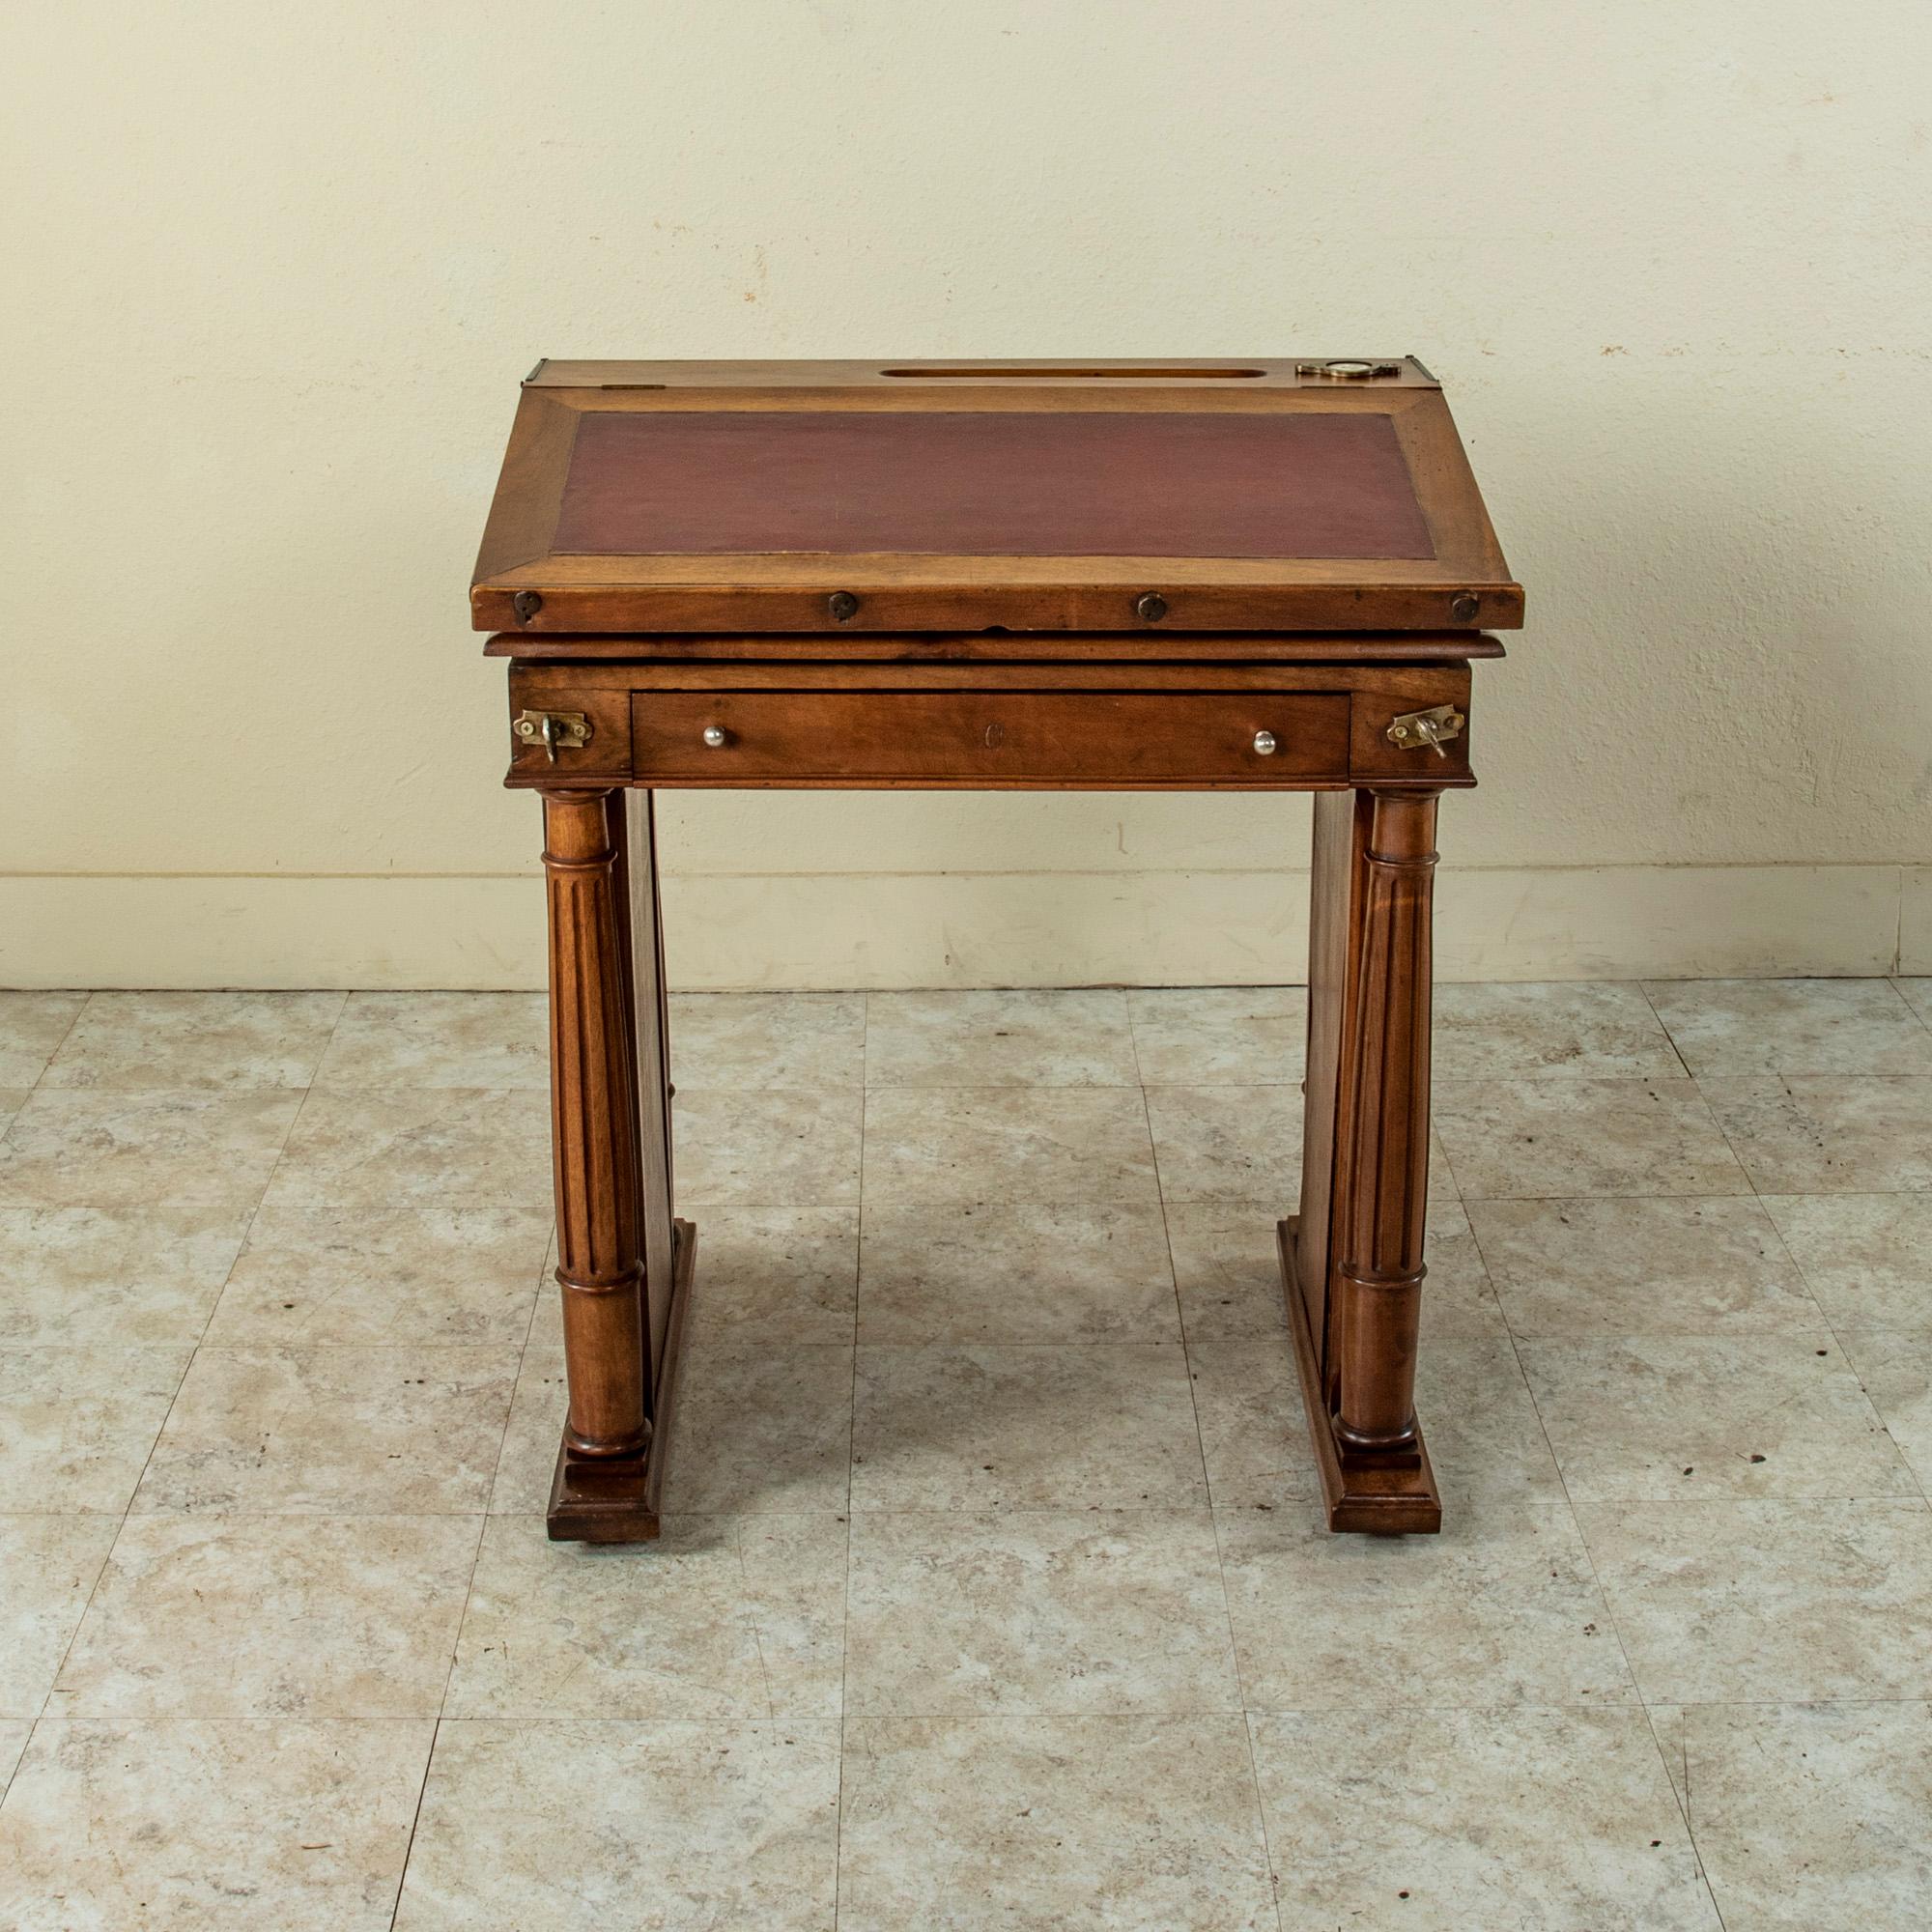 The model for this late nineteenth century French walnut architect's desk was originally exhibited at the World's Fair in Paris in 1889 where it won a silver medal. This desk features a brass plaque on the side marked, Table Feret, 16 Rue Etienne